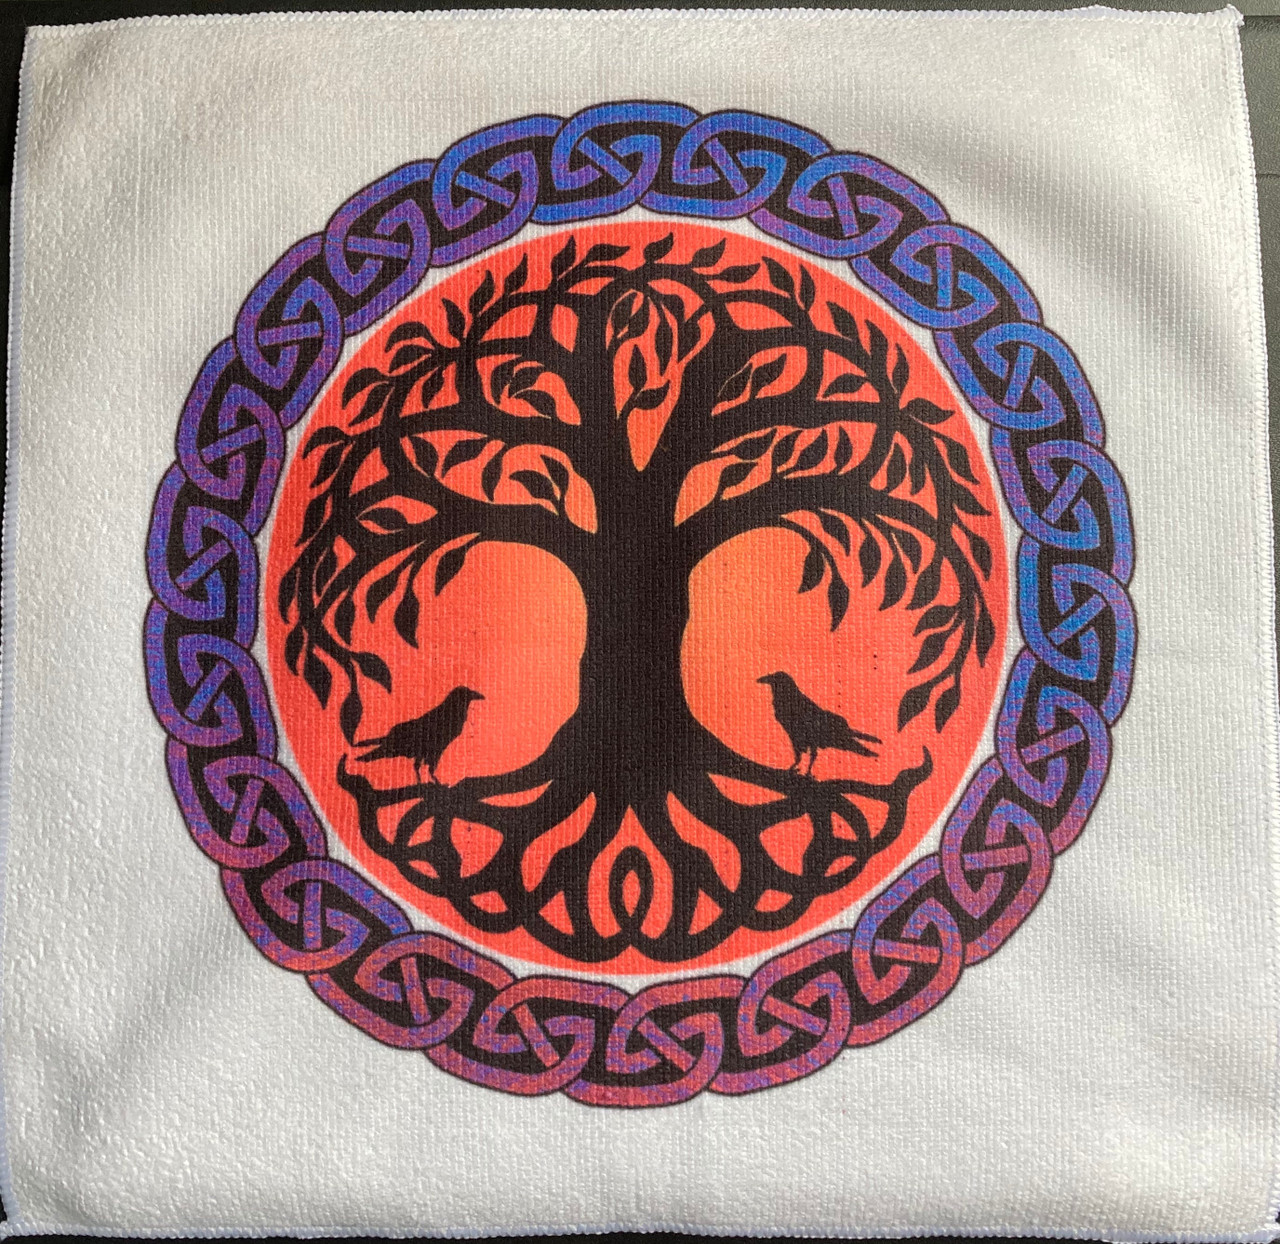 Celtic Tree of Life Car Accessories - Coasters, Air Freshener - Wiccan  Witch - Gothic Halloween Decor - Hagg's Life